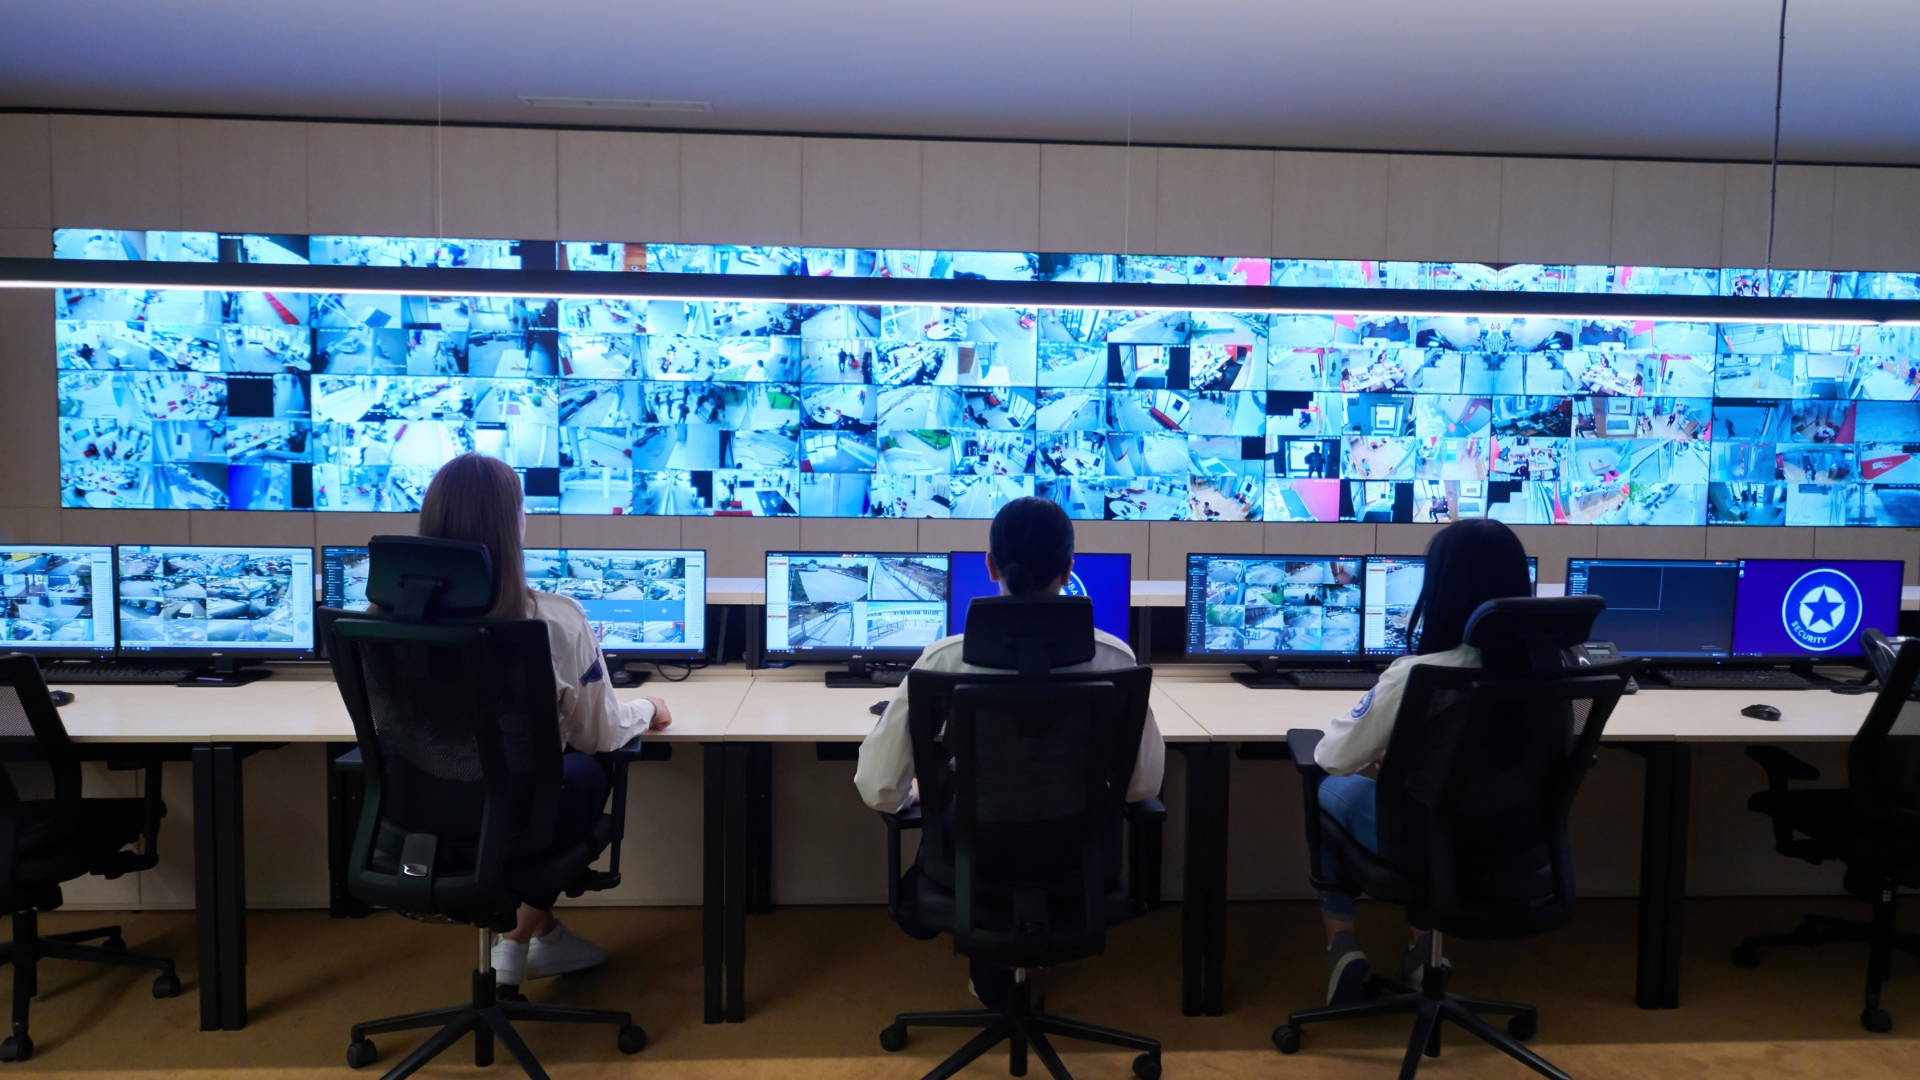 Security Control Room in Blue Mountains​